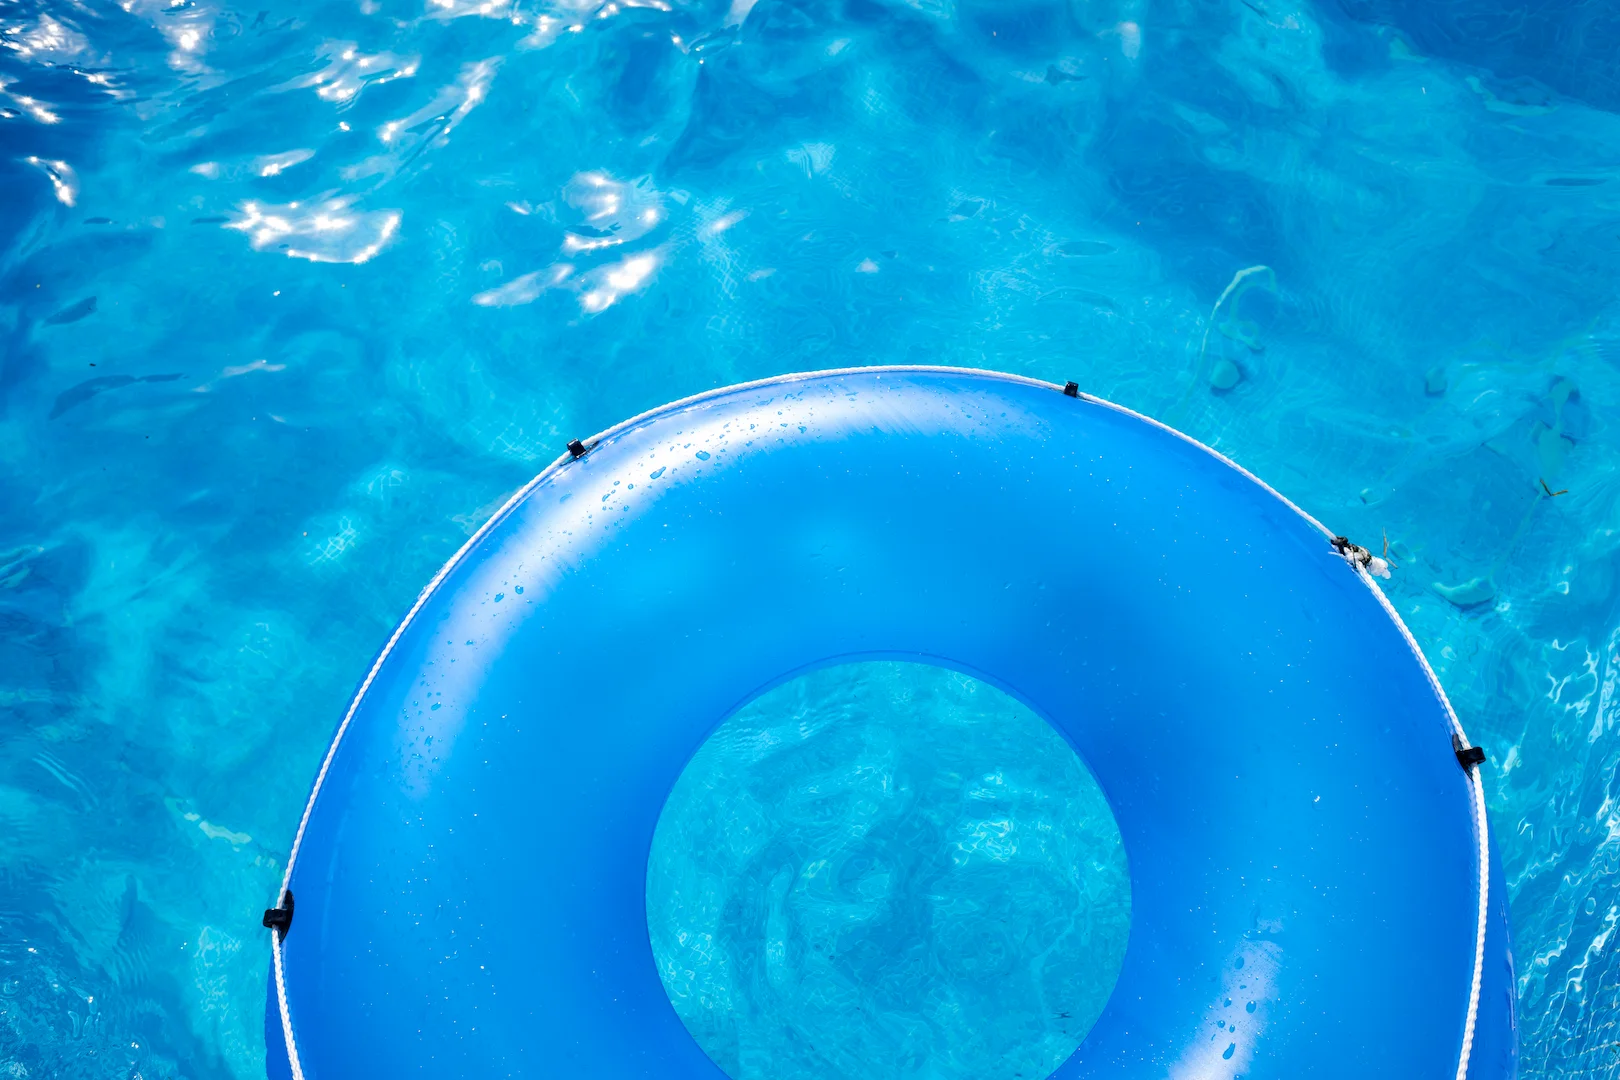 inflatable plastic ring floating above a pool on a 2022 05 03 21 37 02 utc